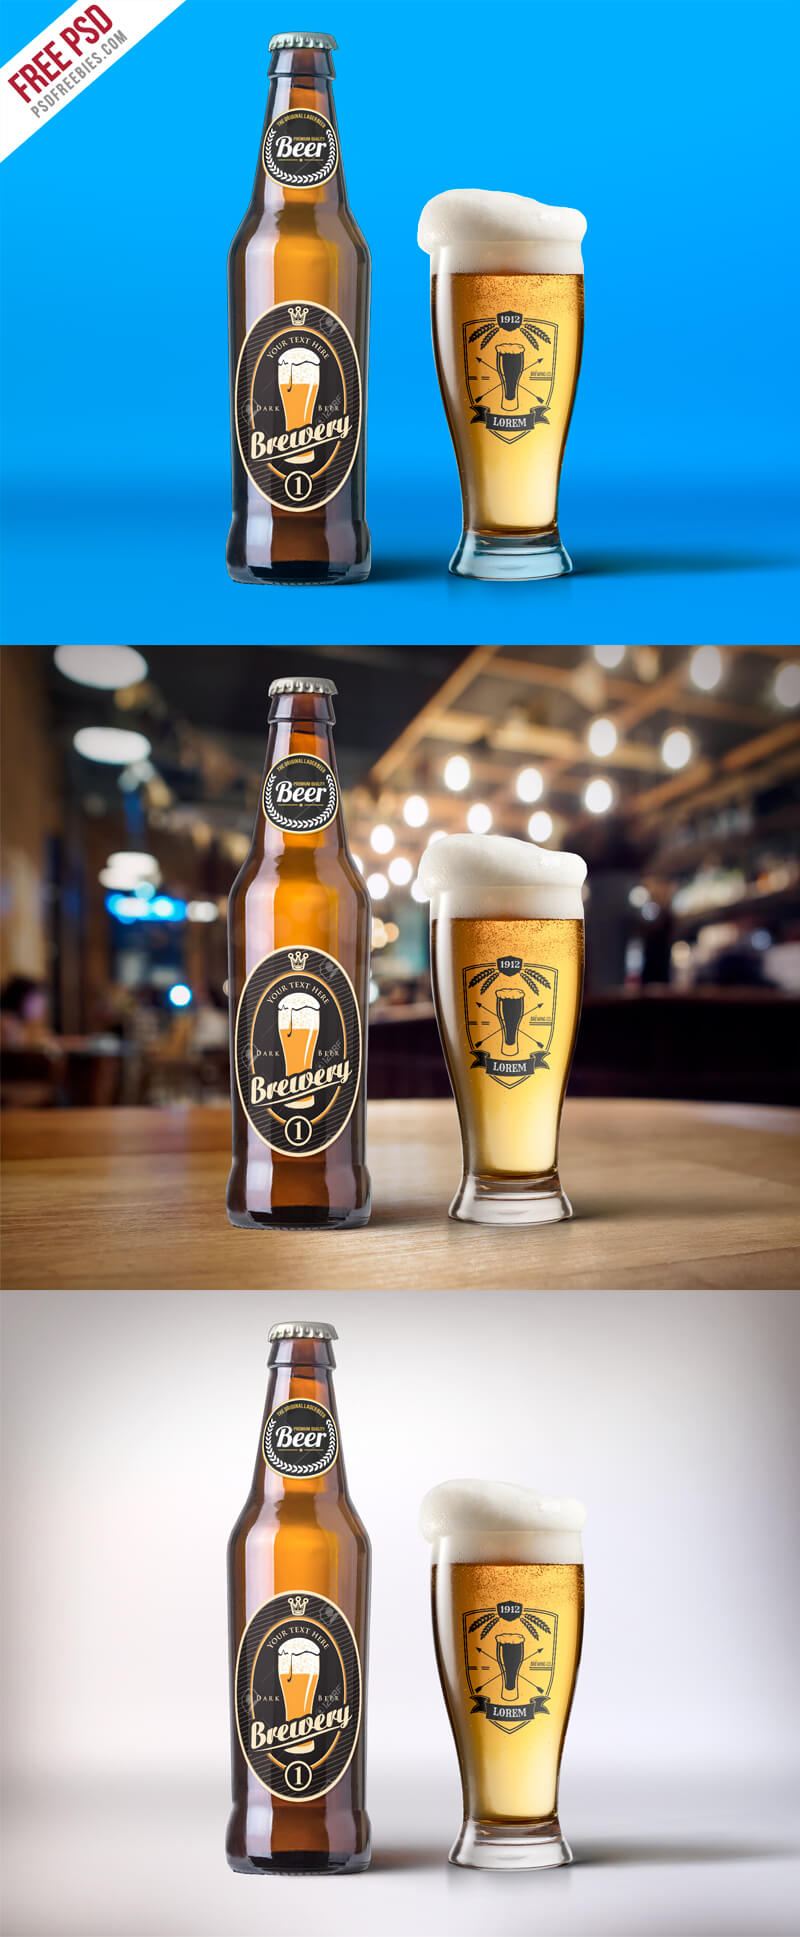 Beer Bottle And Glass Mockup Free Psd | Psdfreebies For Beer Label Template Psd